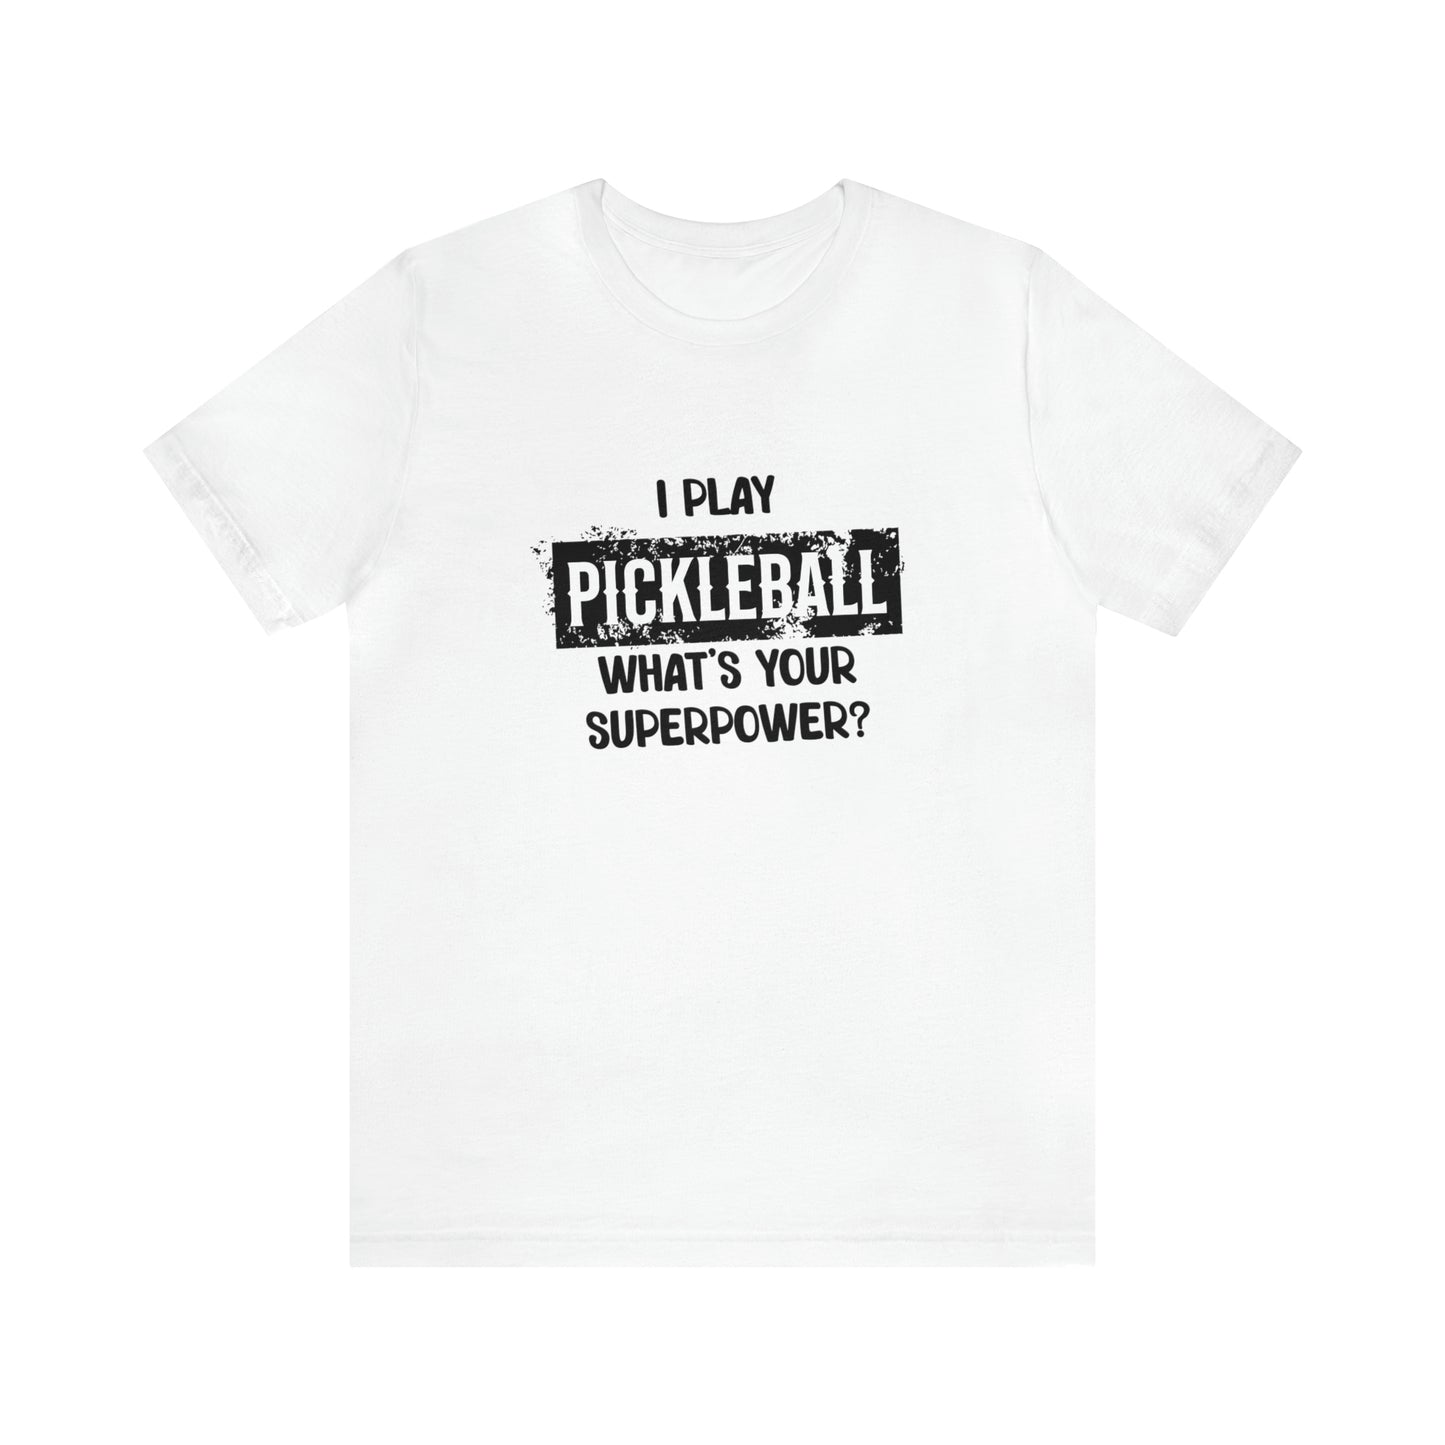 I Play Pickleball, What’s Your Superpower - T-Shirt